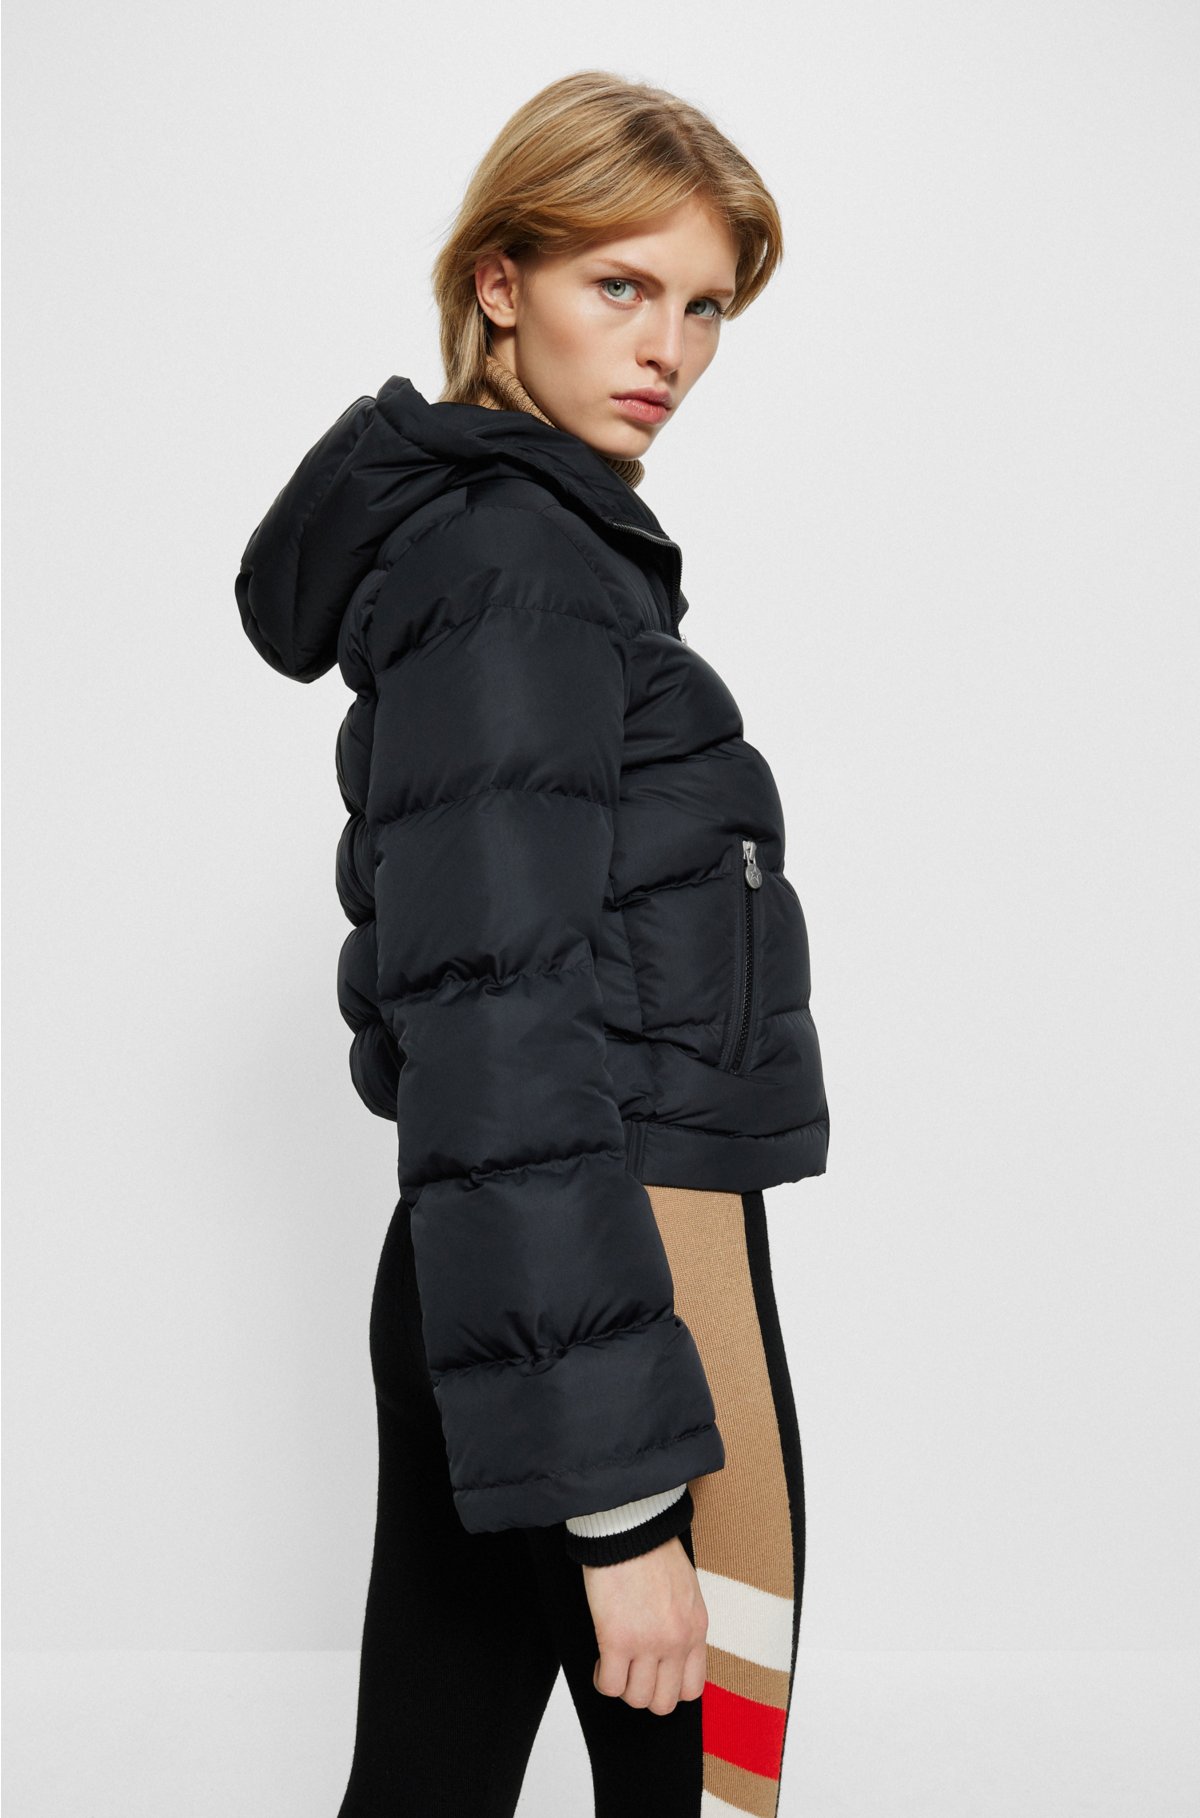 BOSS - BOSS x Perfect Moment hooded jacket with capsule detailing